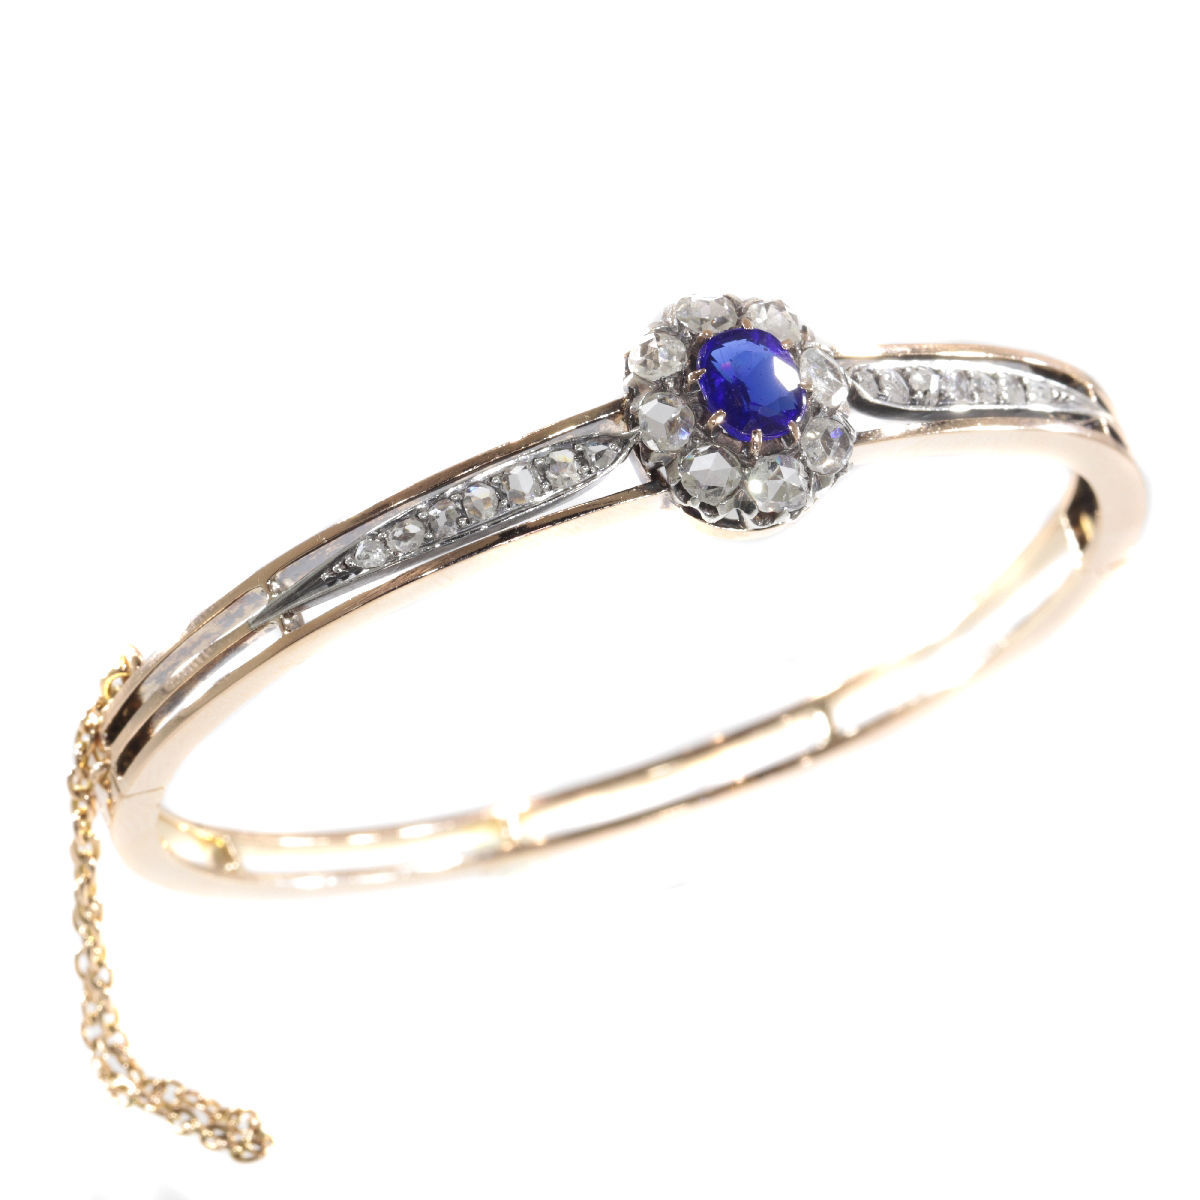 Antique Victorian gold bangle set with diamonds and blue strass